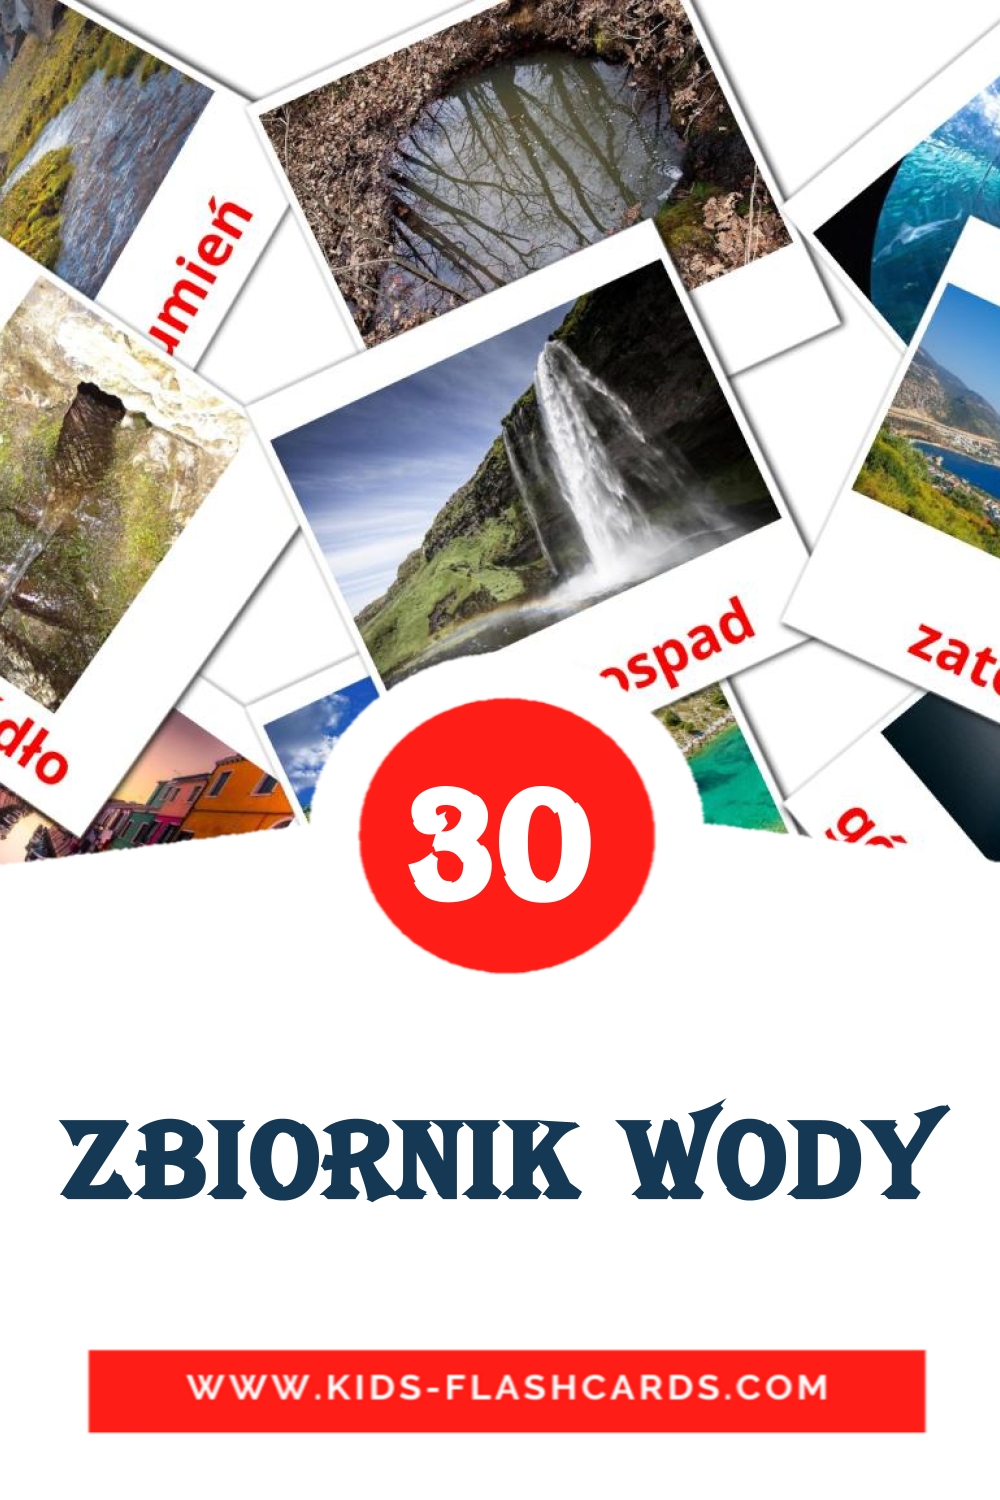 30 Zbiornik wody Picture Cards for Kindergarden in polish